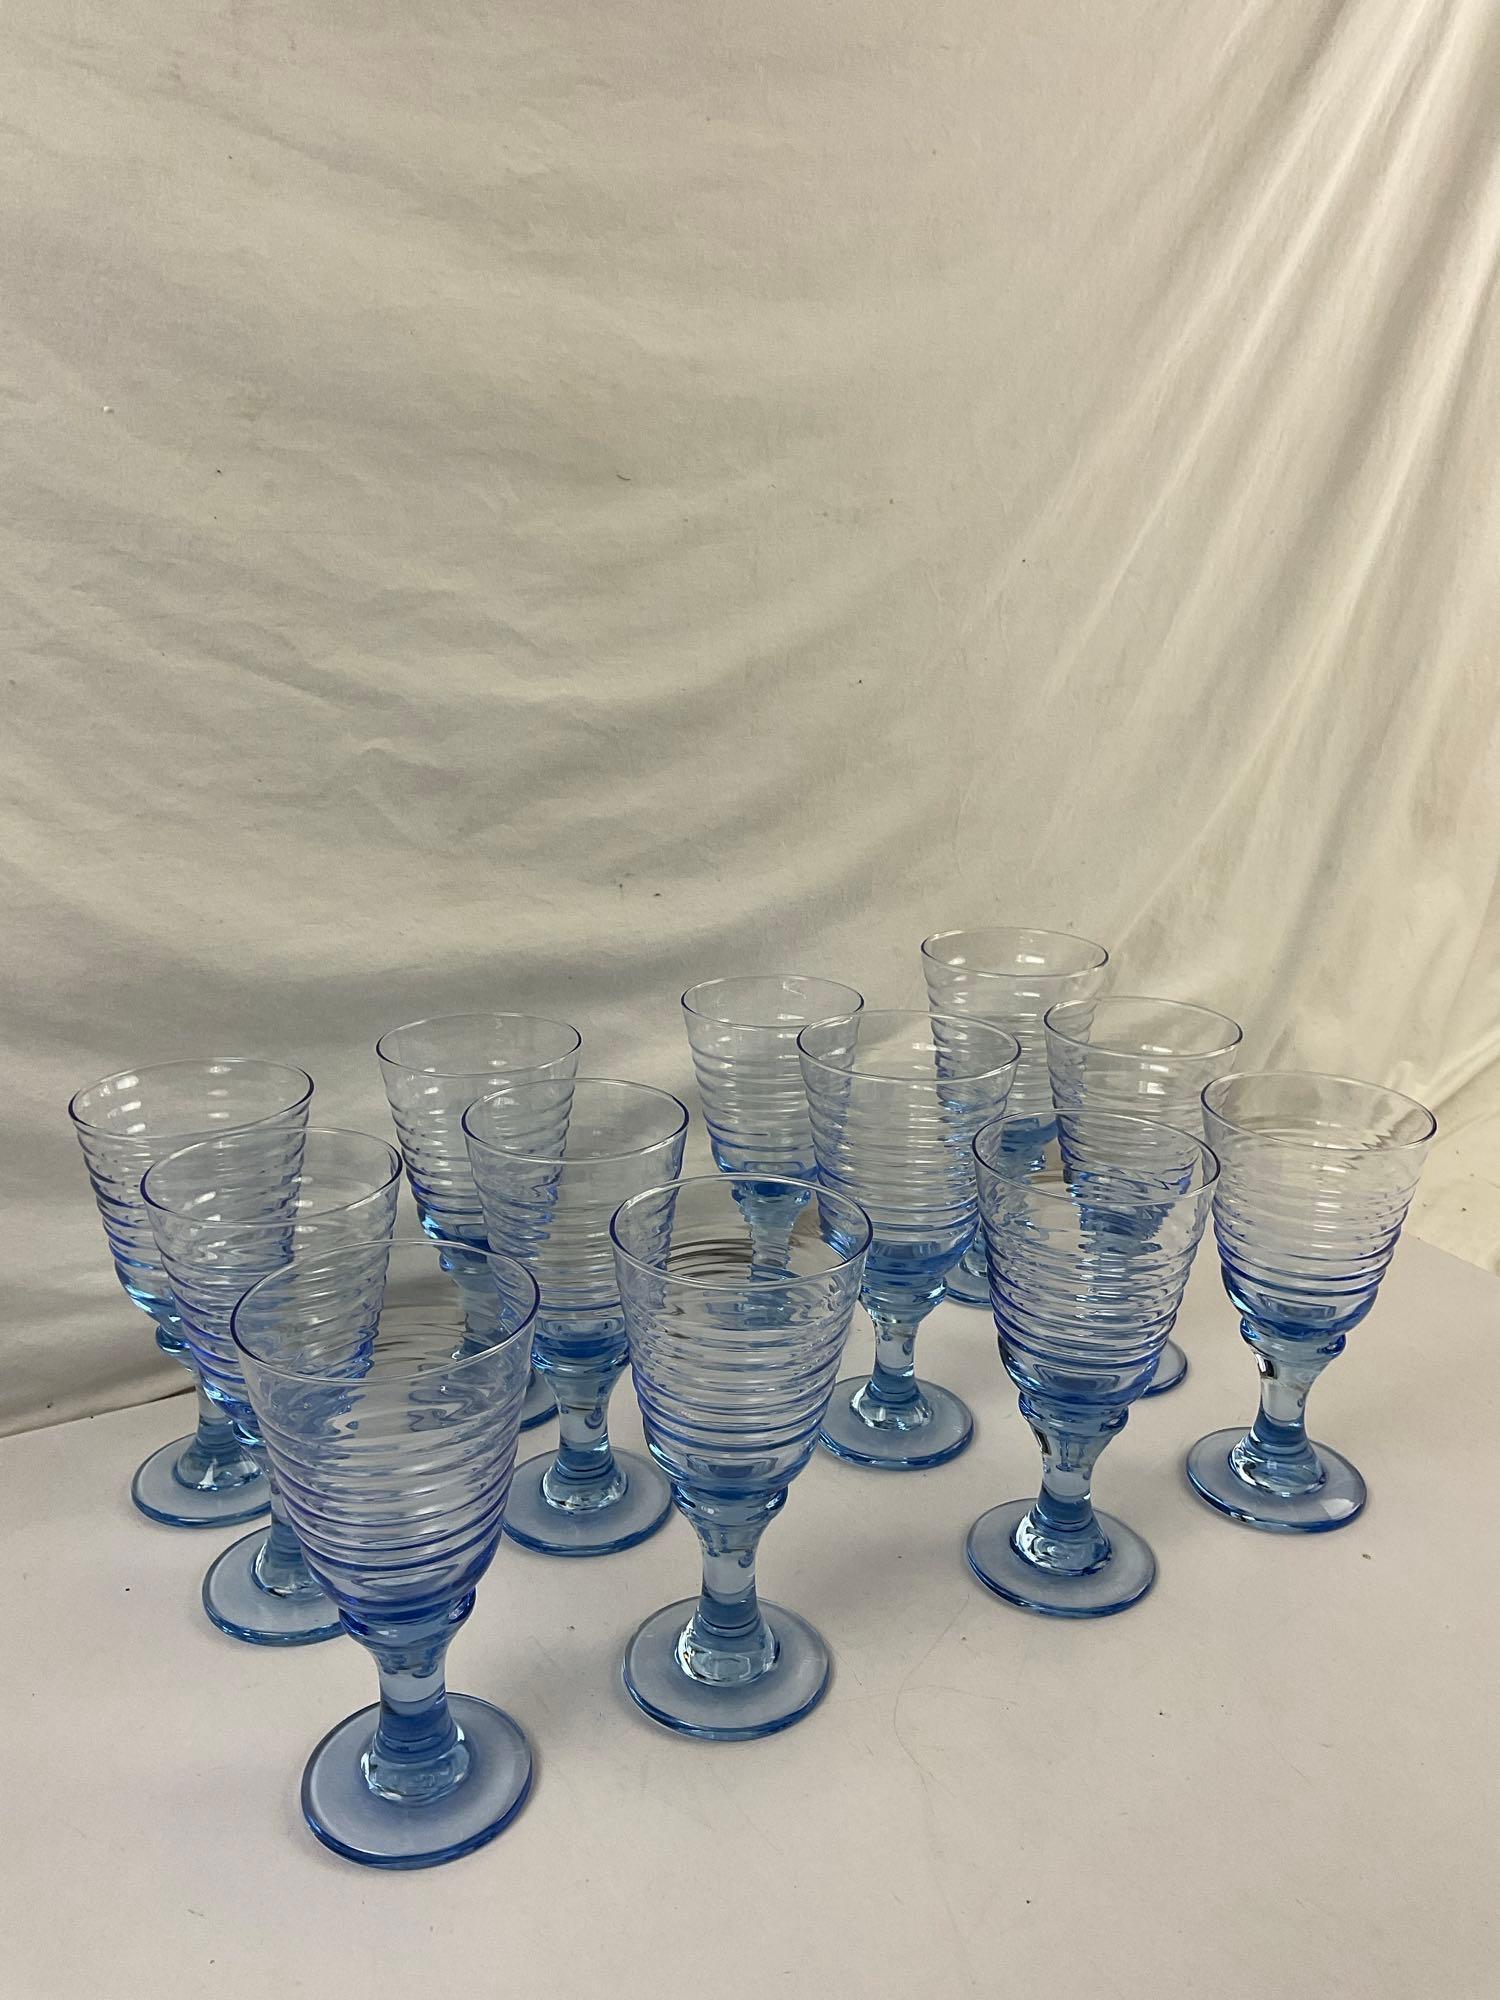 12 pcs Modern Blue Ombre Glass Drinking Glasses w/ Striped Design. Measures 3.5" x 7" See pics.